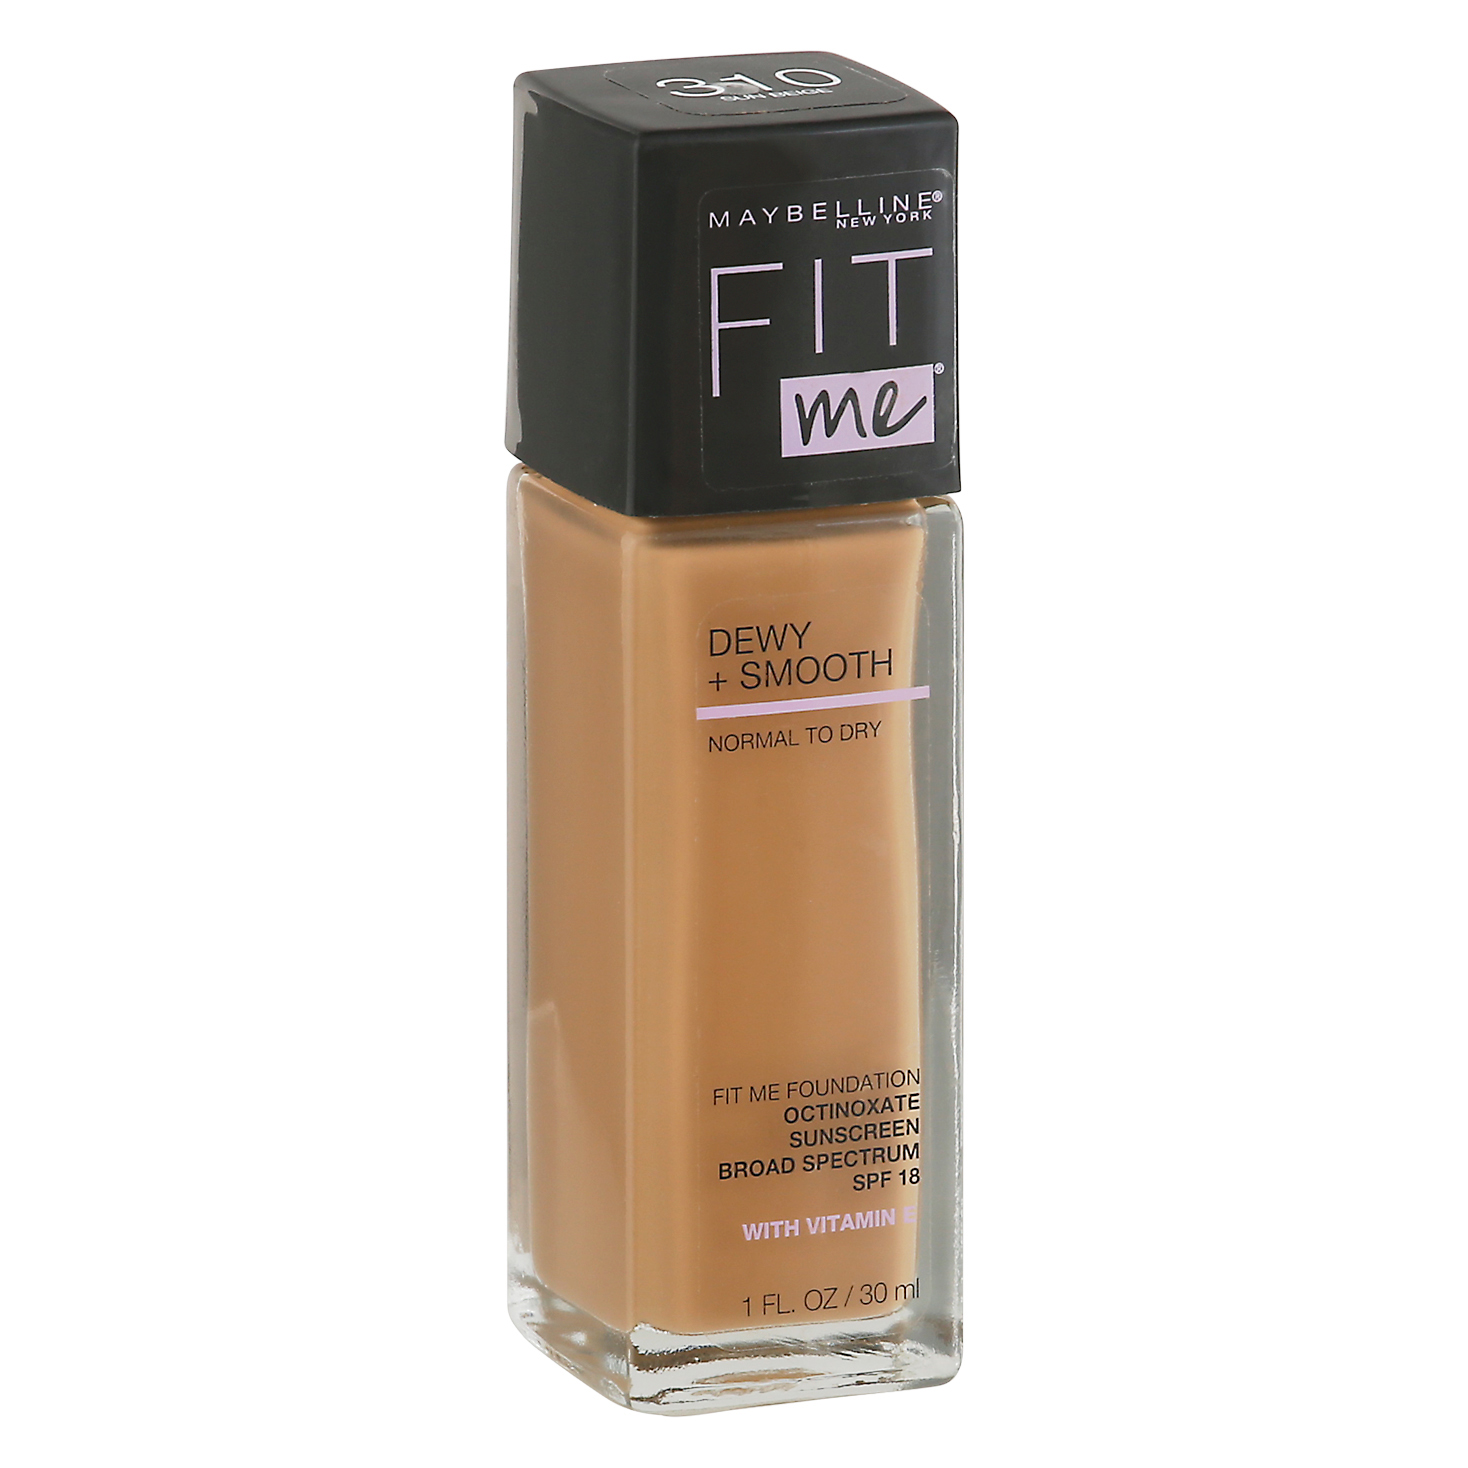 Maybelline Fit Me Dewy + Smooth Base – Makeup Bar